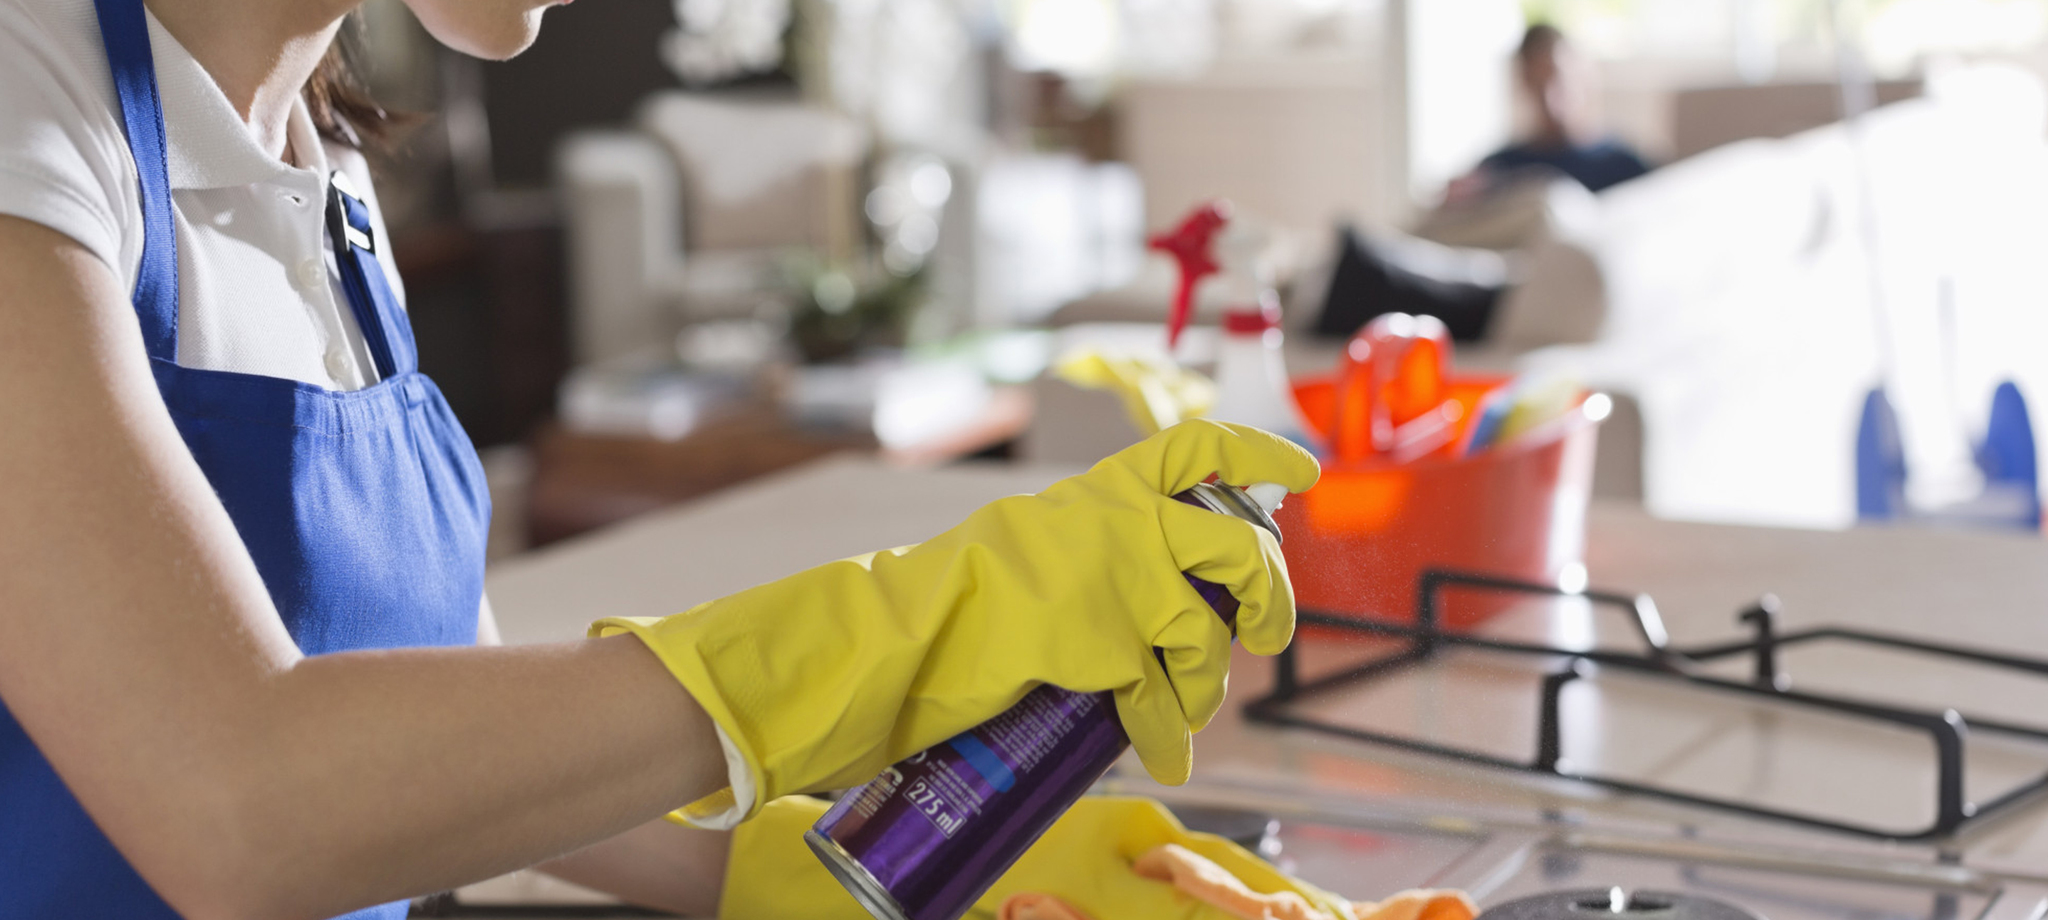 Why do we need to clean apartments, houses after renting out?